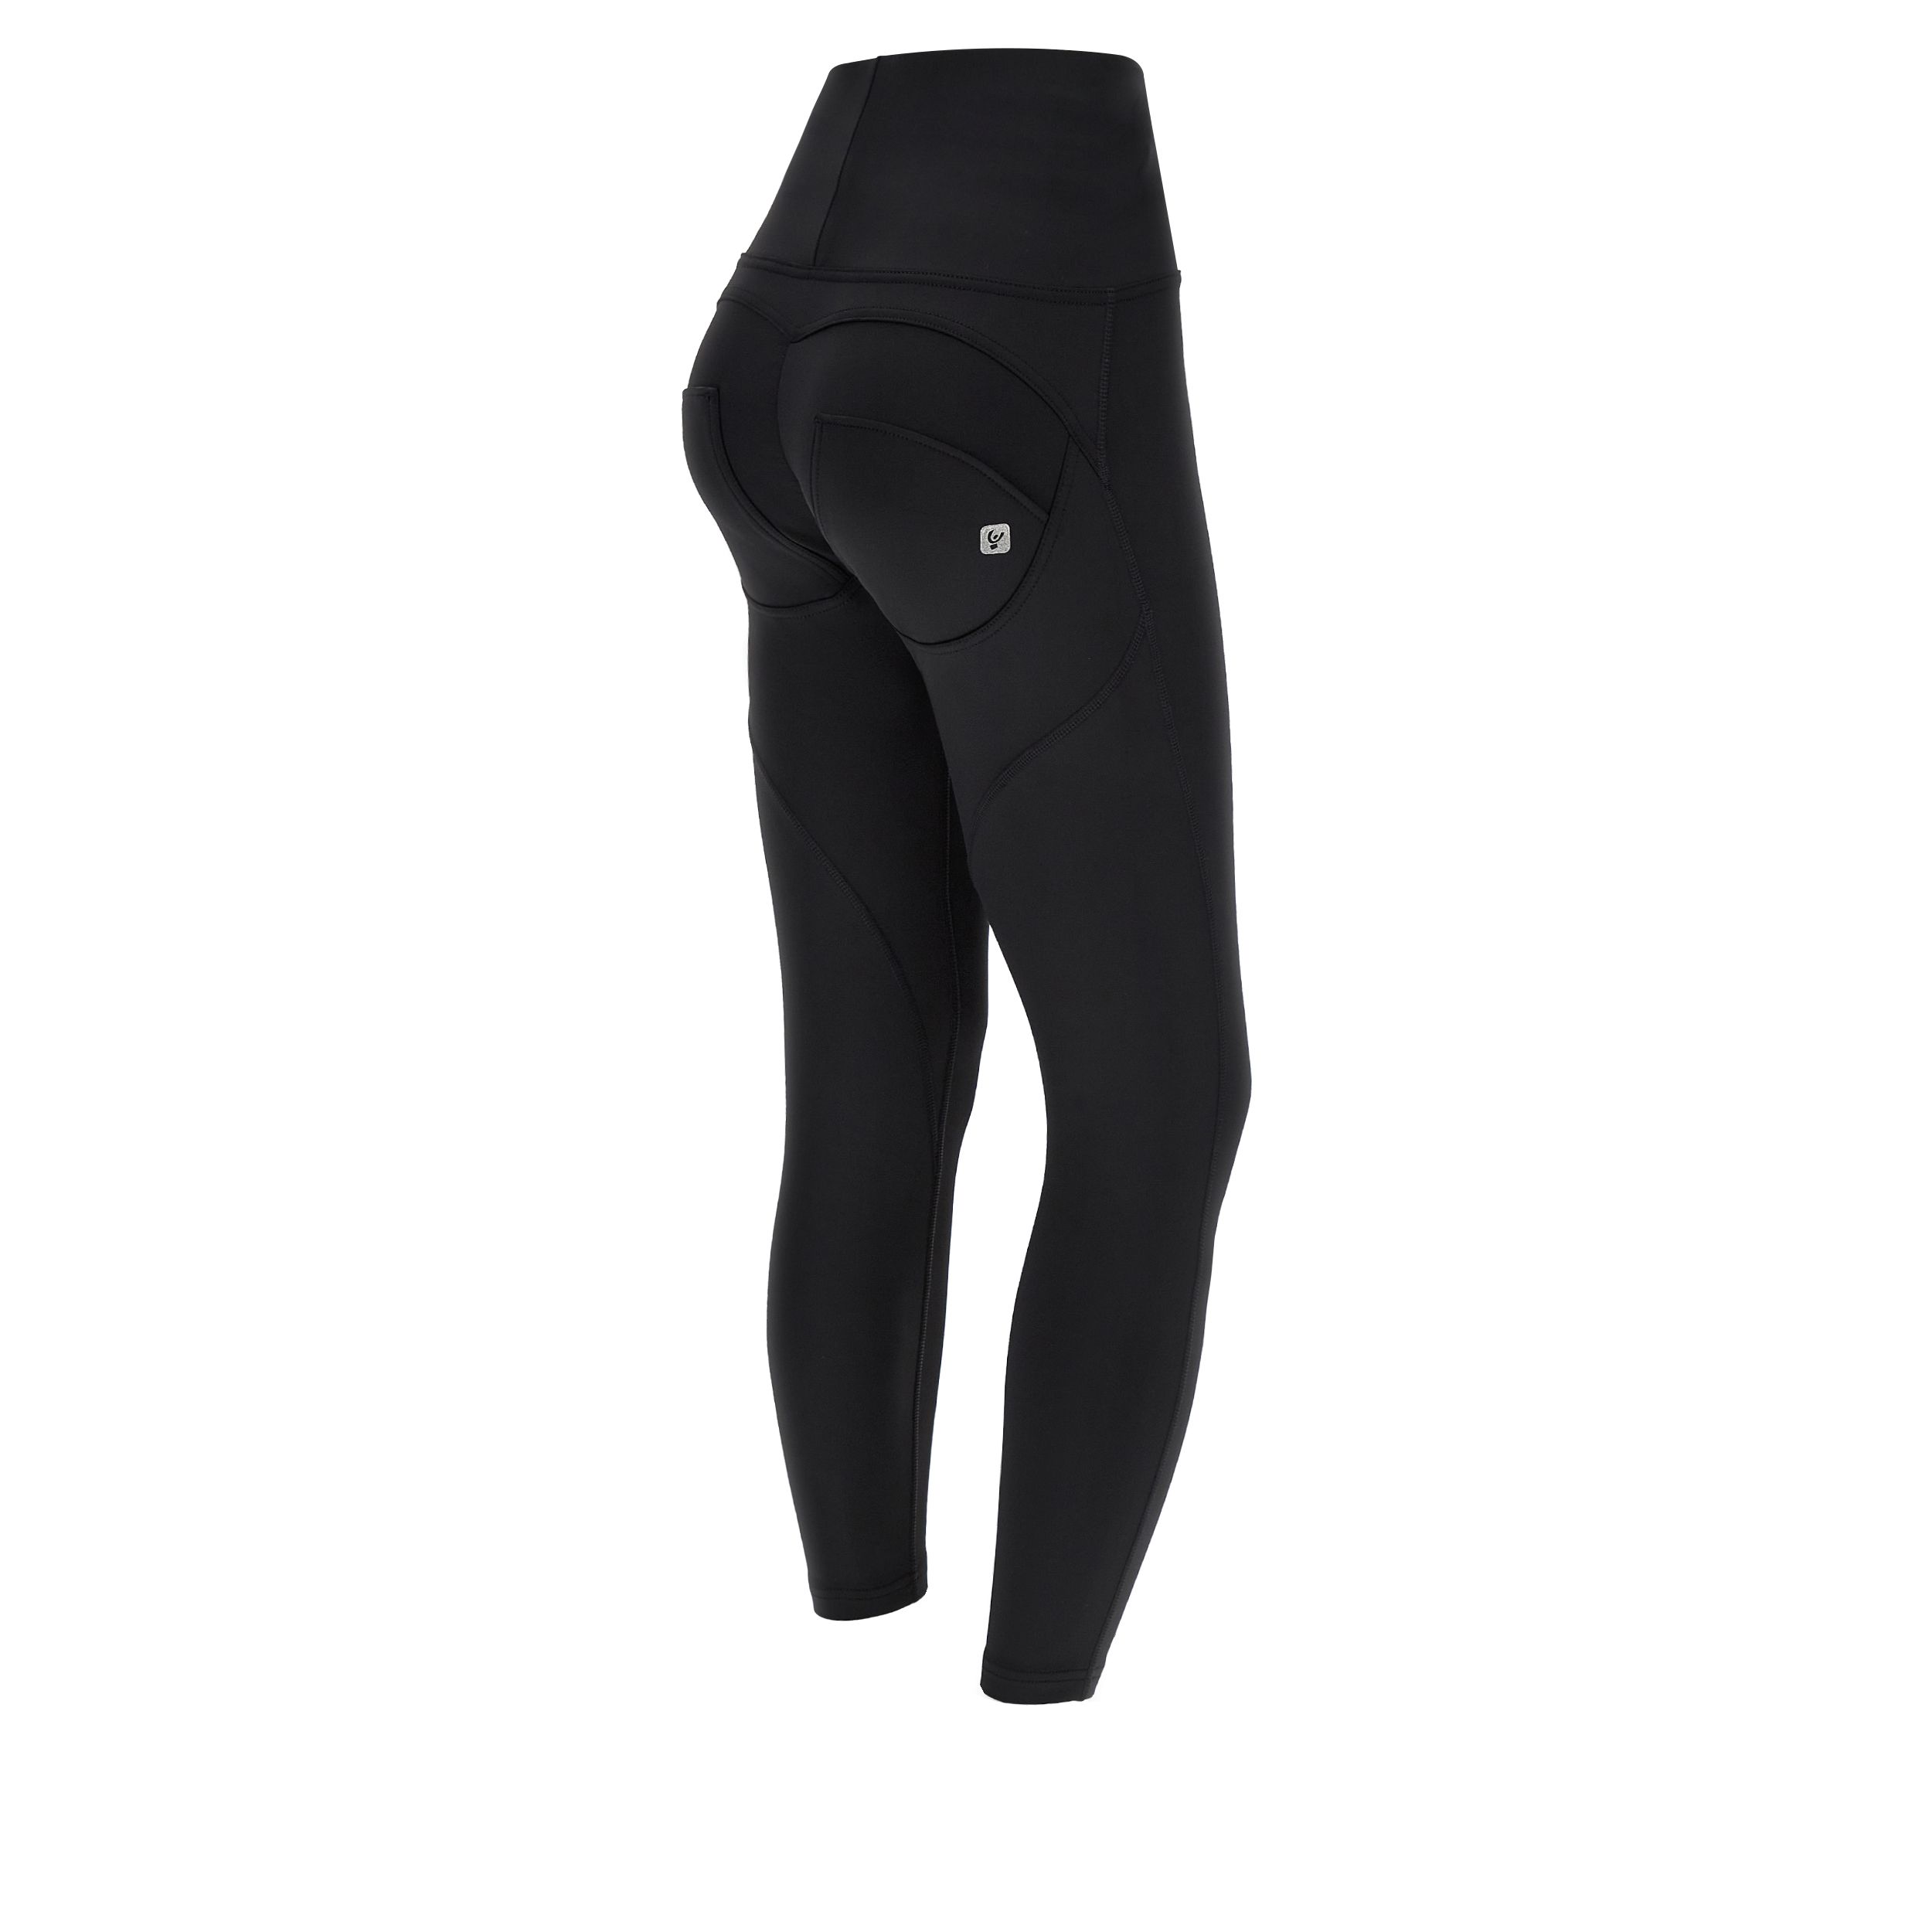 WR.UP® Sport leggings with a super high waist and back pockets